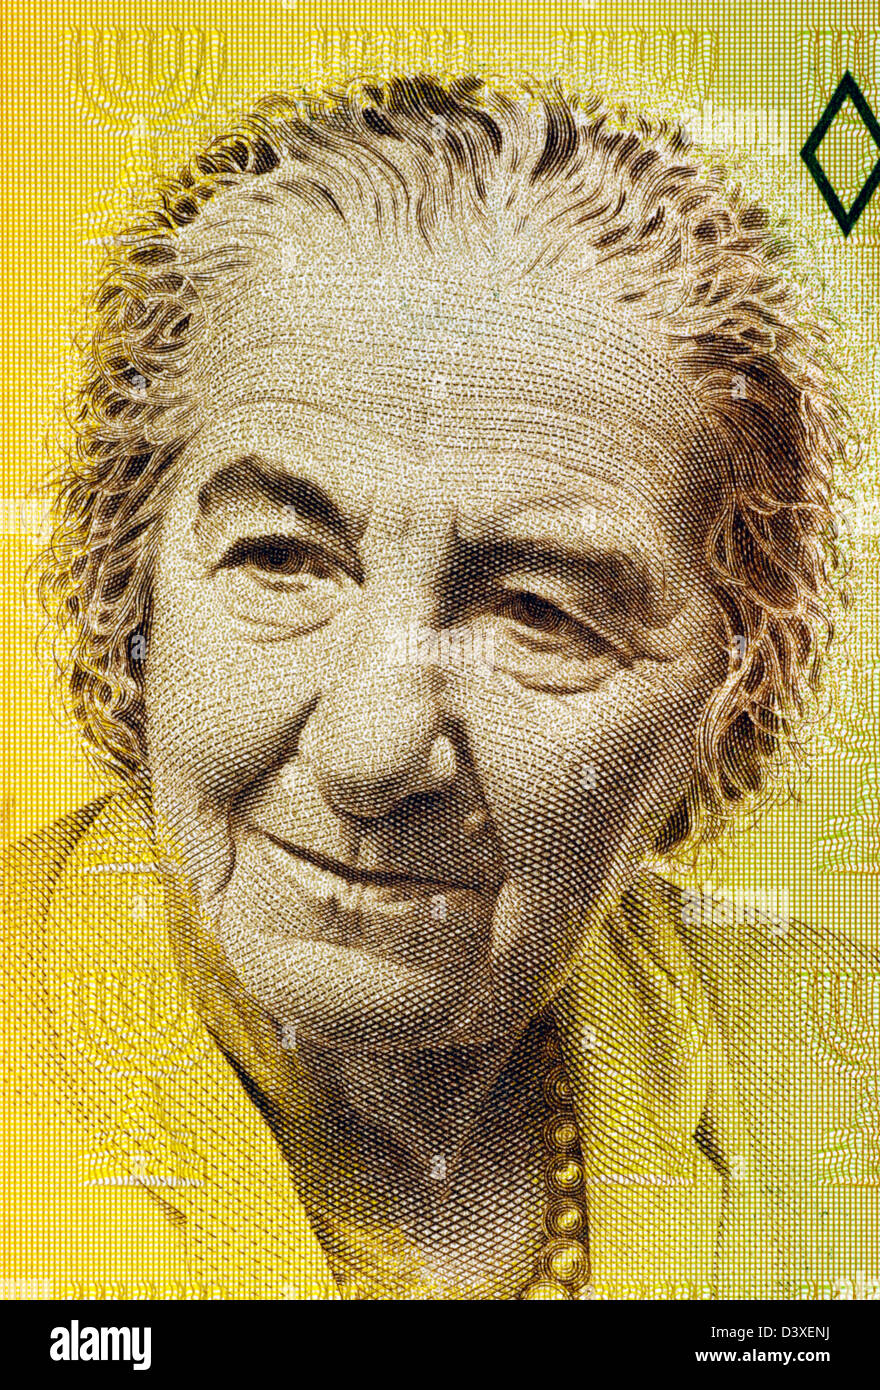 Golda Meir (1898-1978) on 10 New Sheqalim 1992 Banknote from Israel. 4th Prime Minister of Israel. Stock Photo